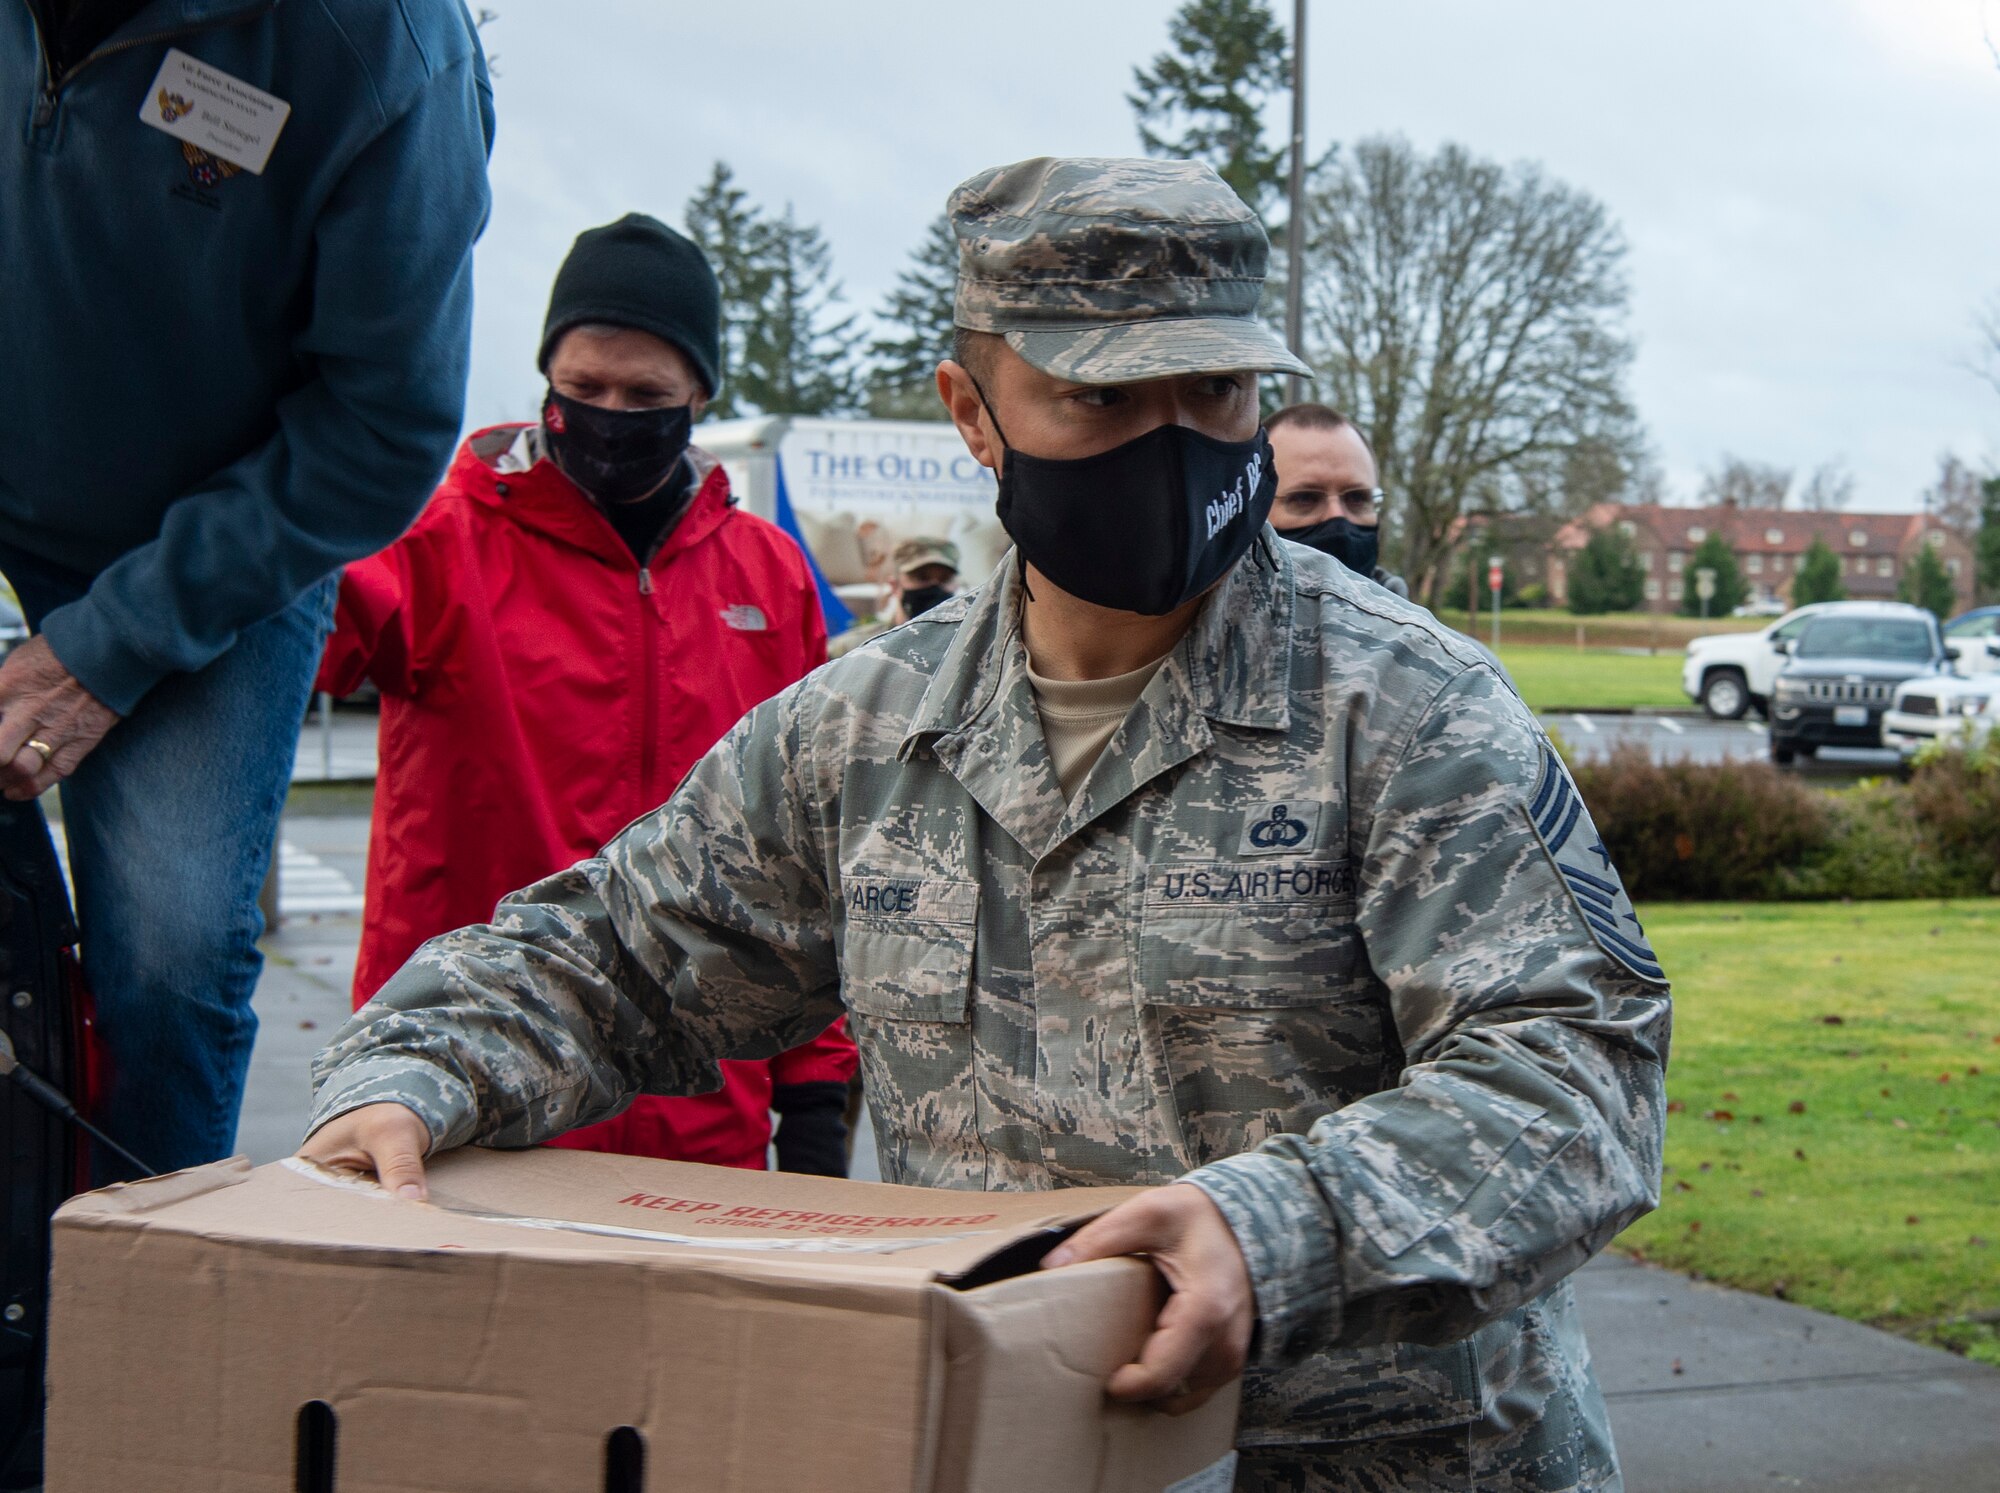 Chief Master Sgt. Joseph Arce, 62nd Airlift Wing command chief, carries a box of hams during Operation Ham Grenade at Joint Base Lewis-McChord, Wash., Dec. 17, 2020. More than 350 hams were donated to McChord Field Airmen by the Air Force Association McChord Field Chapter 334 and Pierce Military Business Alliance. (U.S. Air Force photo by Senior Airman Tryphena Mayhugh)